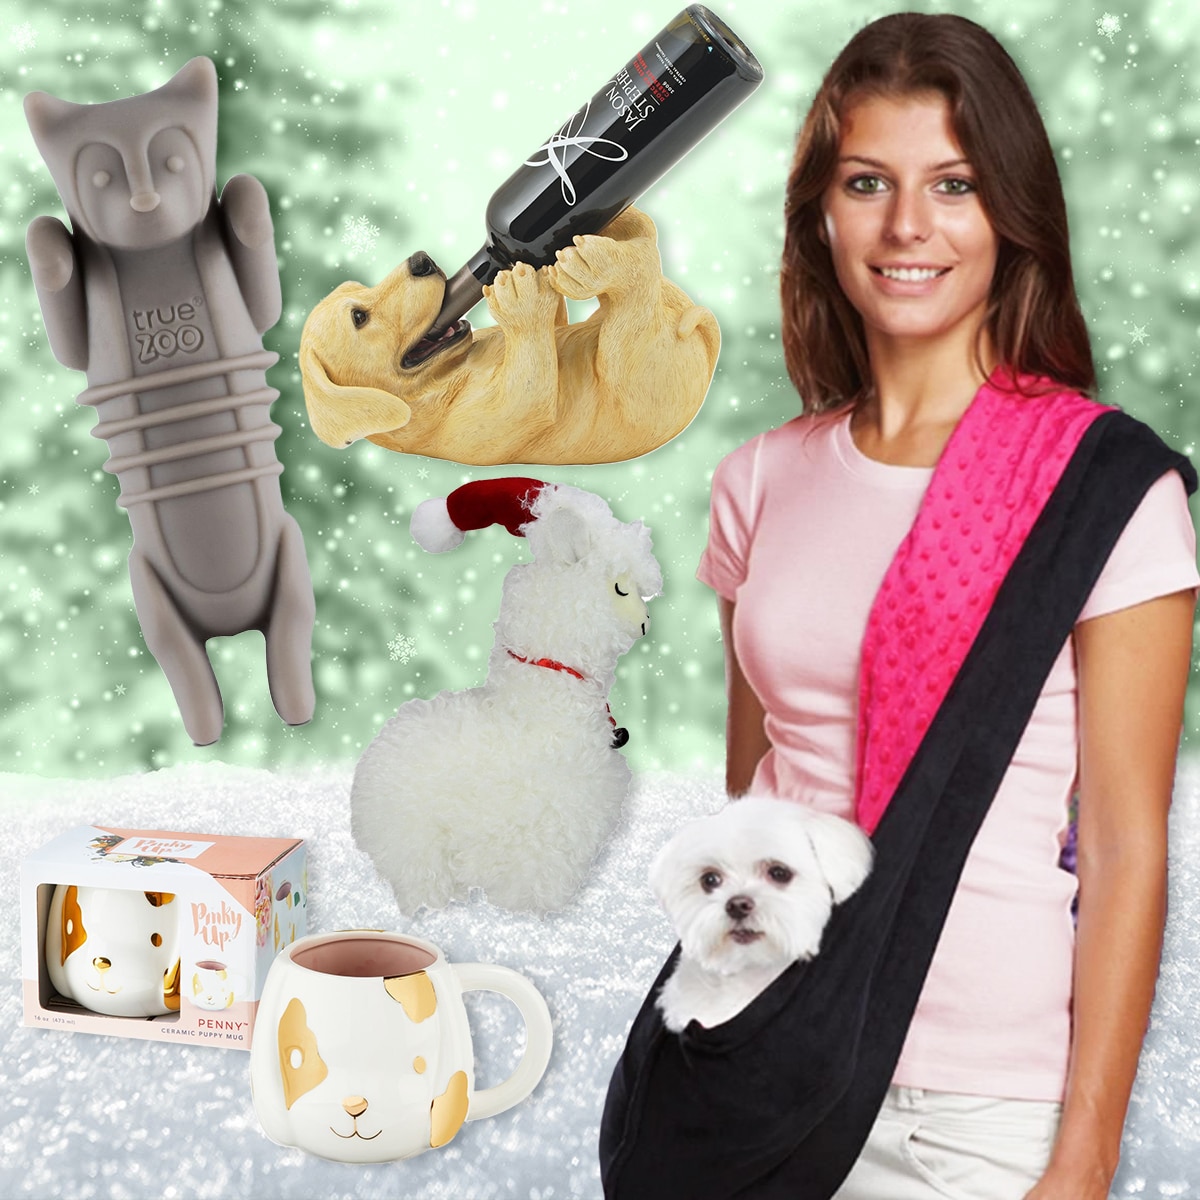 Wholesale Pet Lover Gifts | Animal Themed Gifts for Dog and Cat Owners